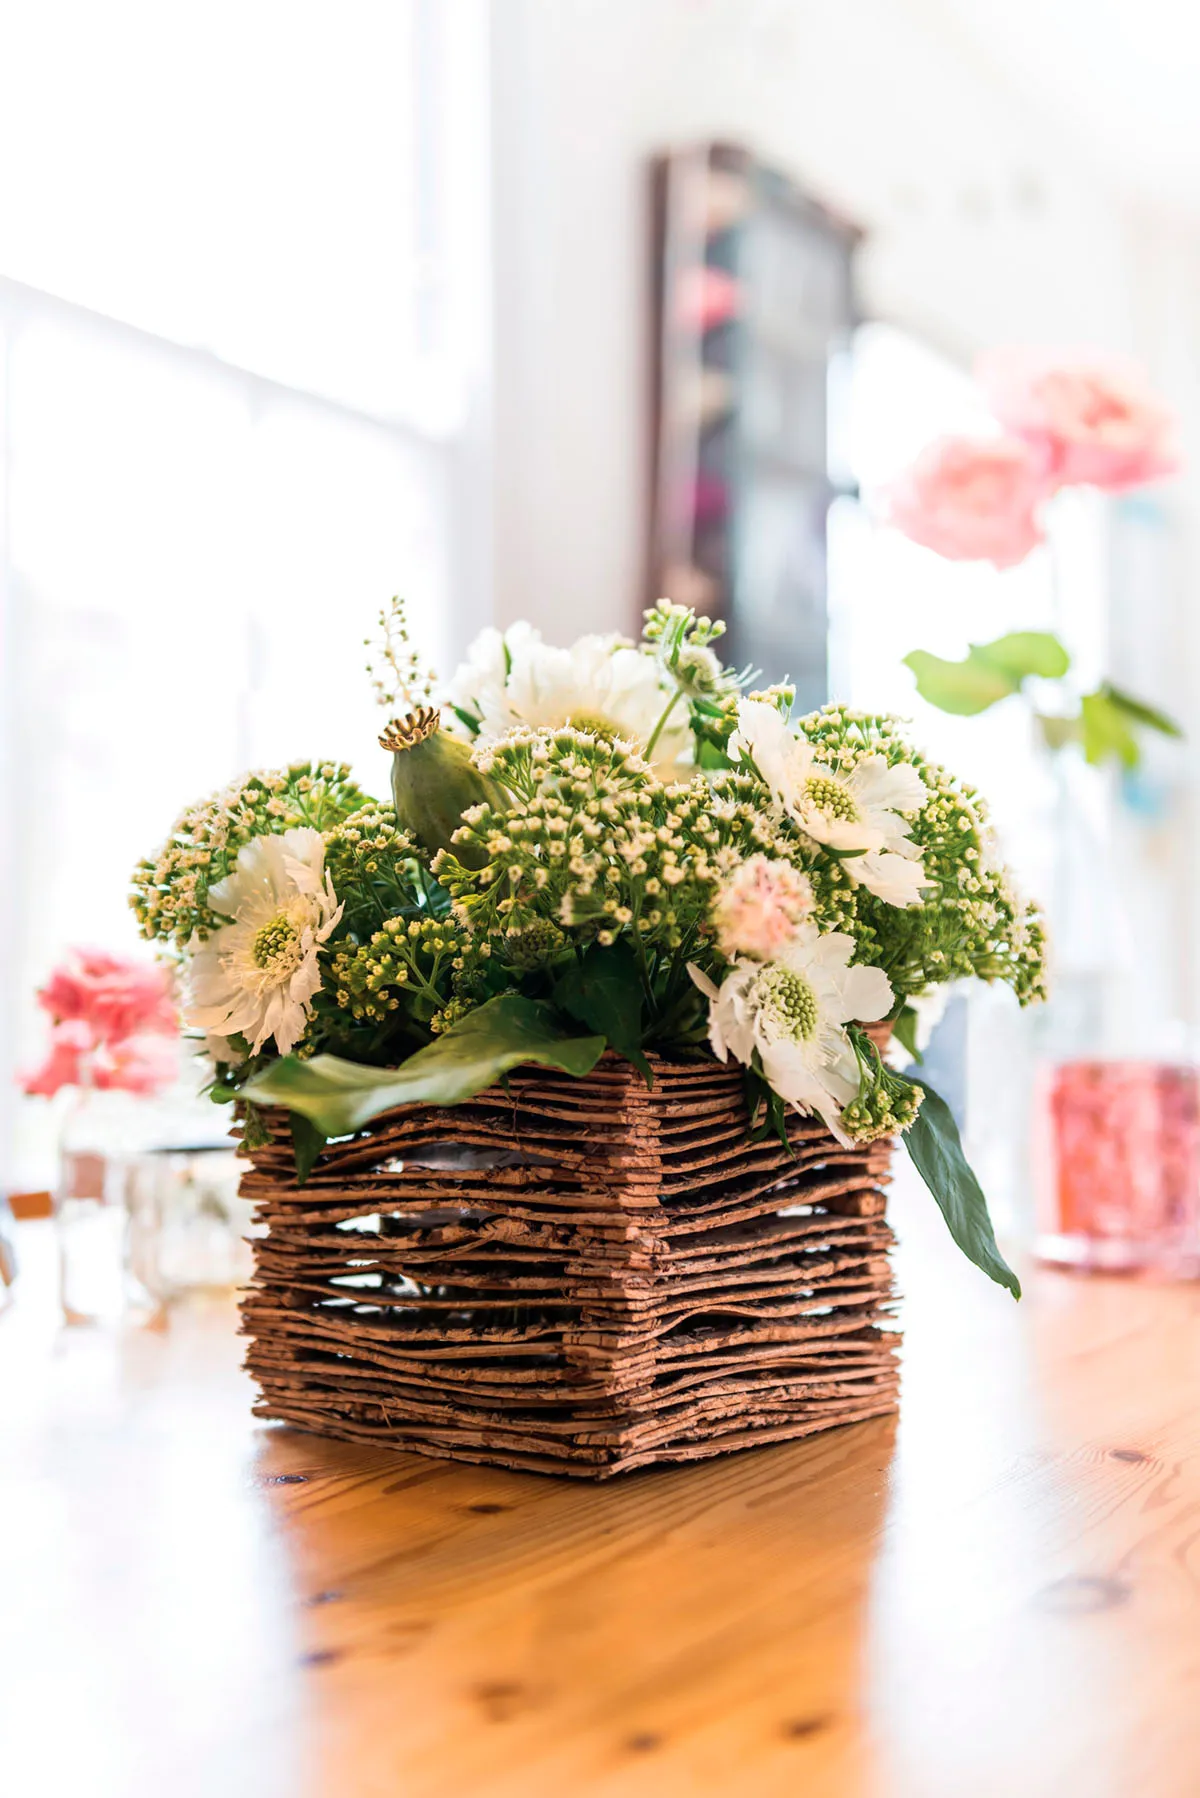 How to make a floral centerpiece